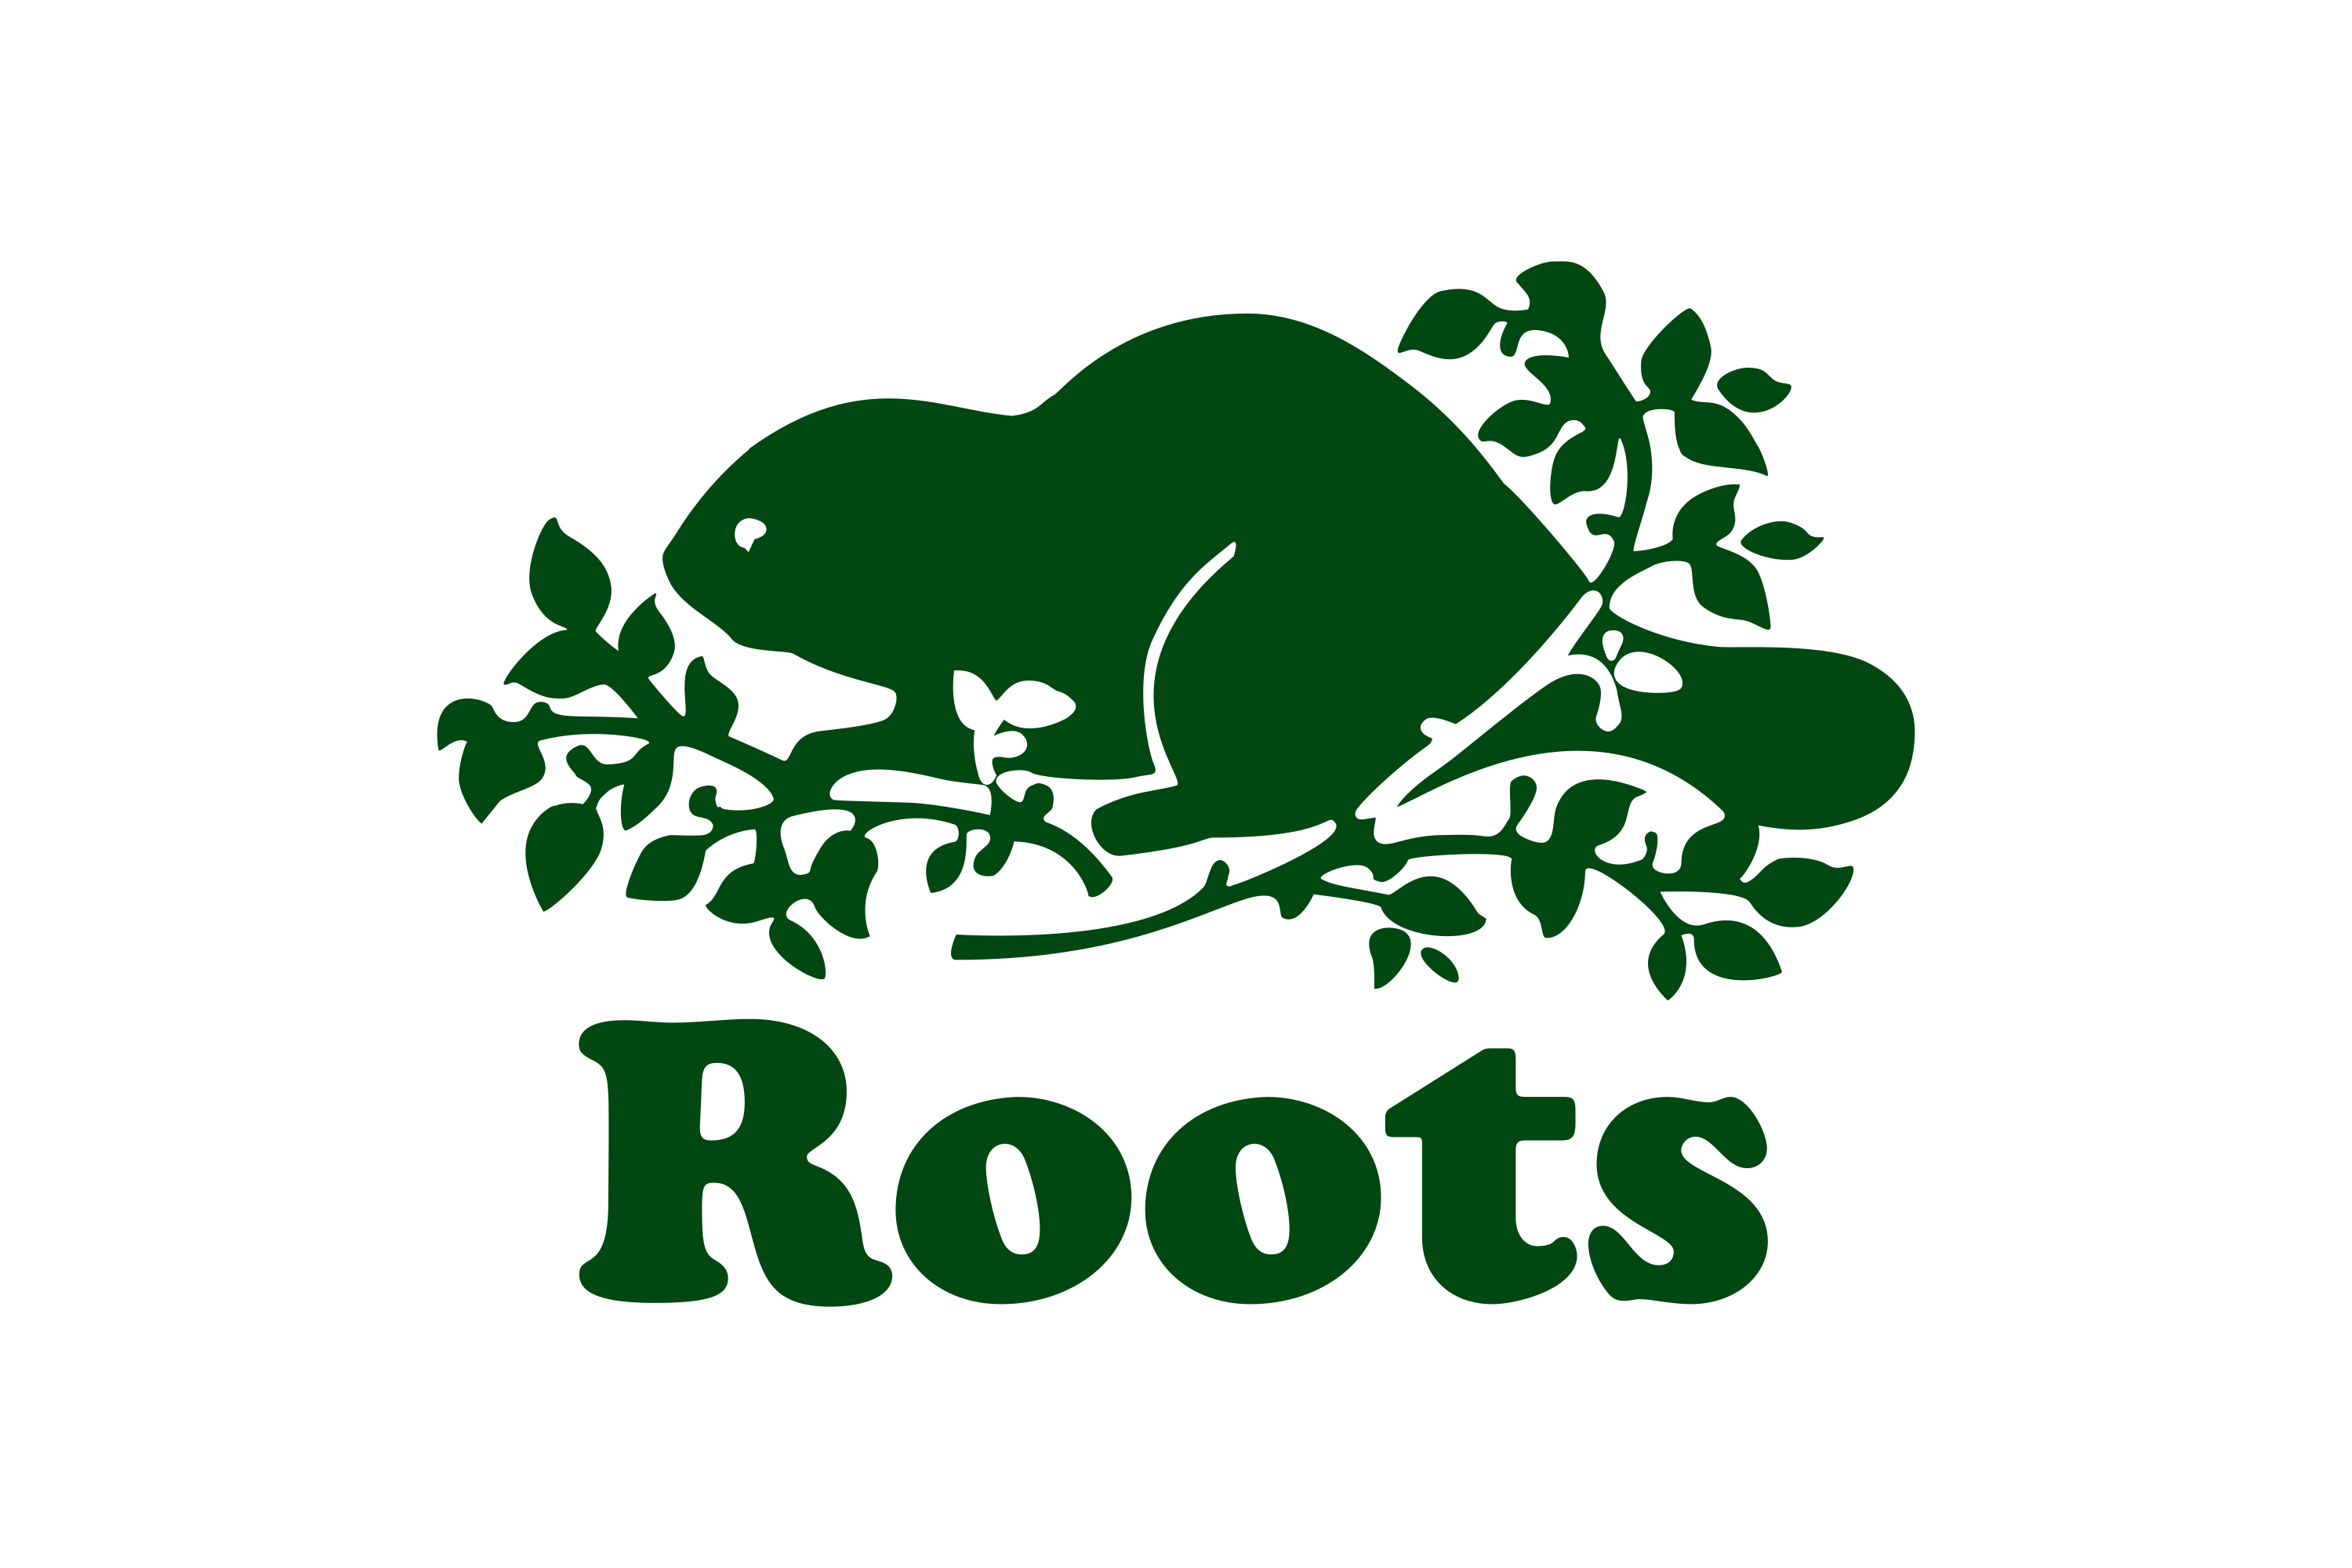 Download Roots Canada Logo in SVG Vector or PNG File Format - Logo.wine